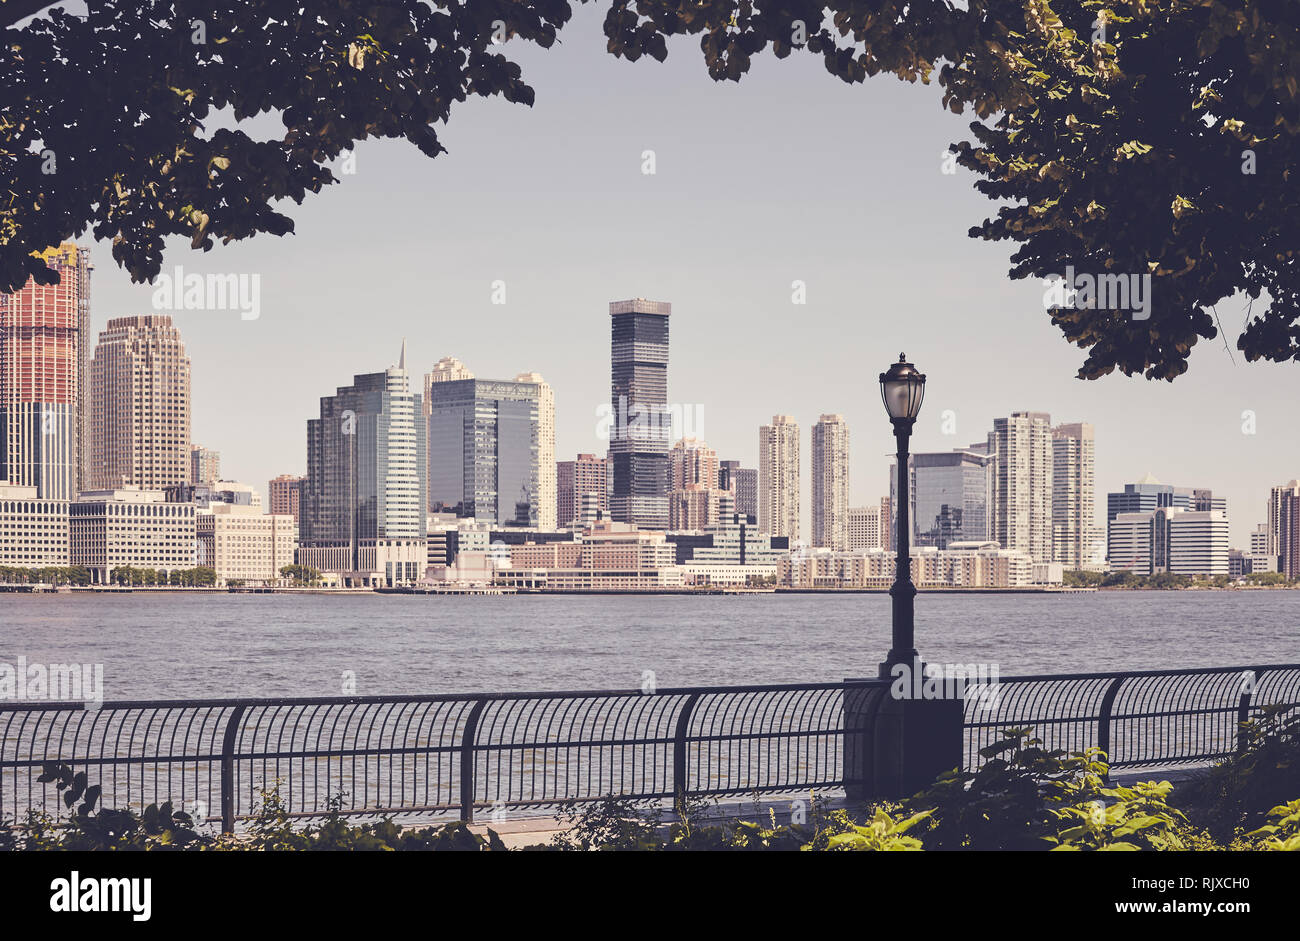 Manhattan West Side Promenade Street Lamp Jersey City In Distance Color Toning Applied Usa Stock Photo Alamy